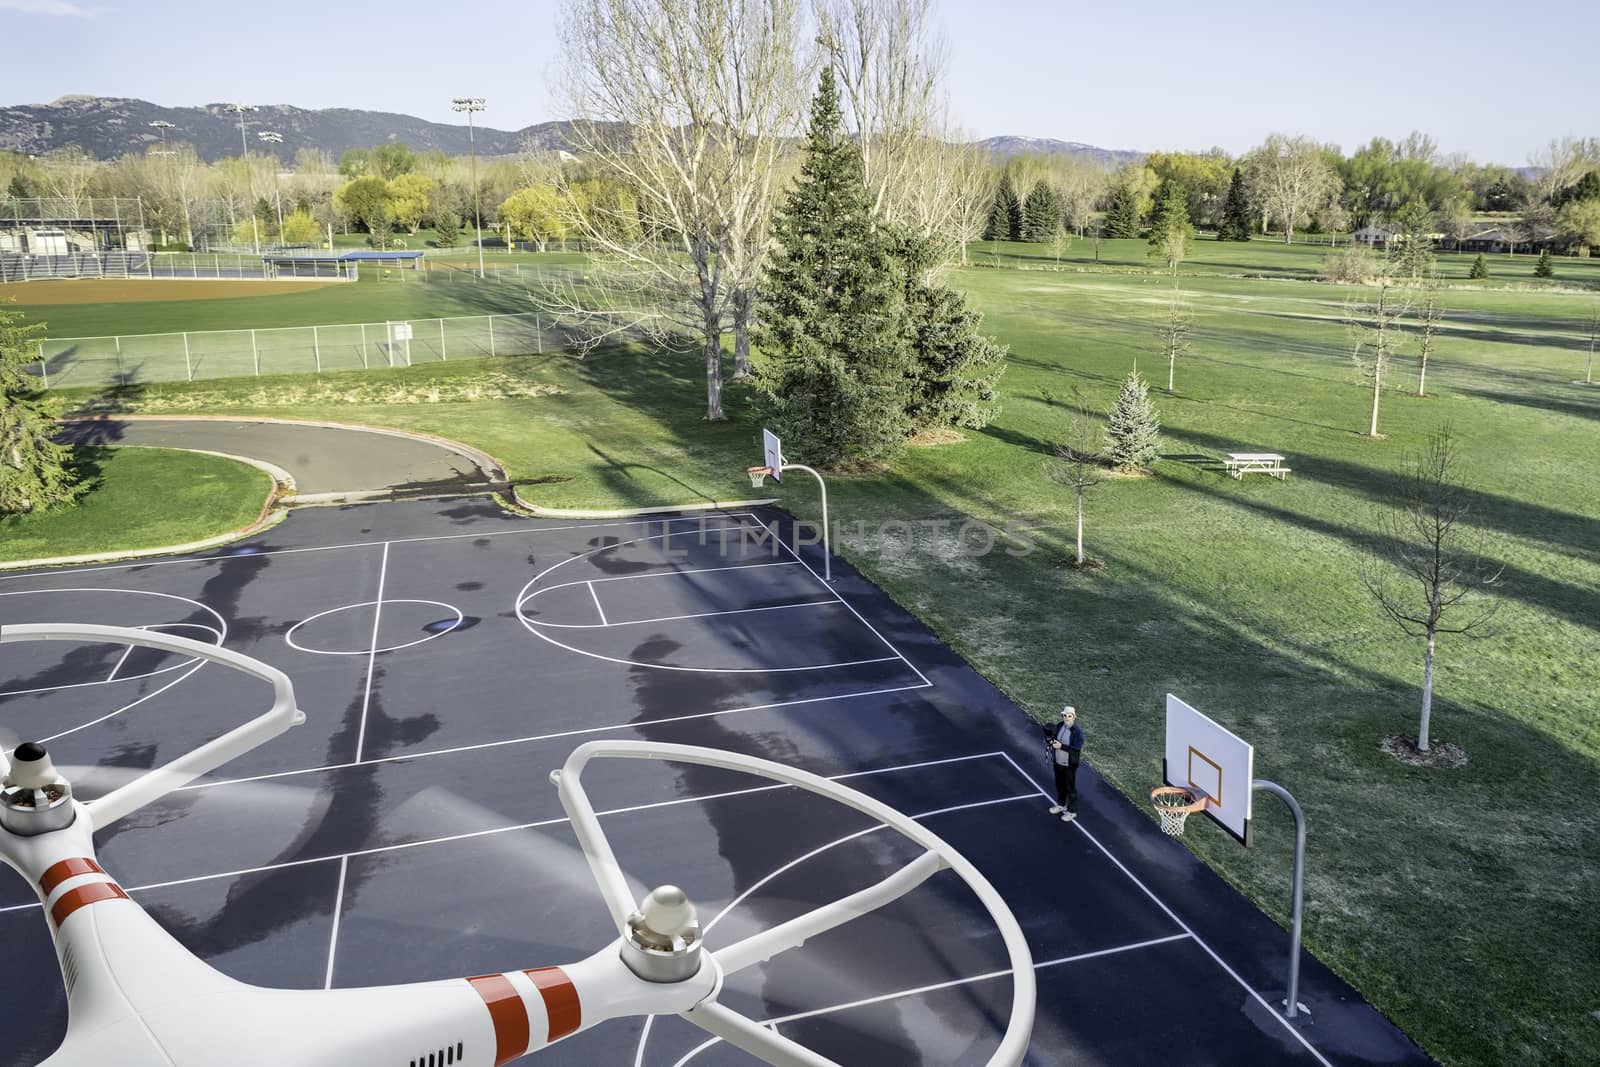 quadcopter drone flying over empty basketball court with an operator standing